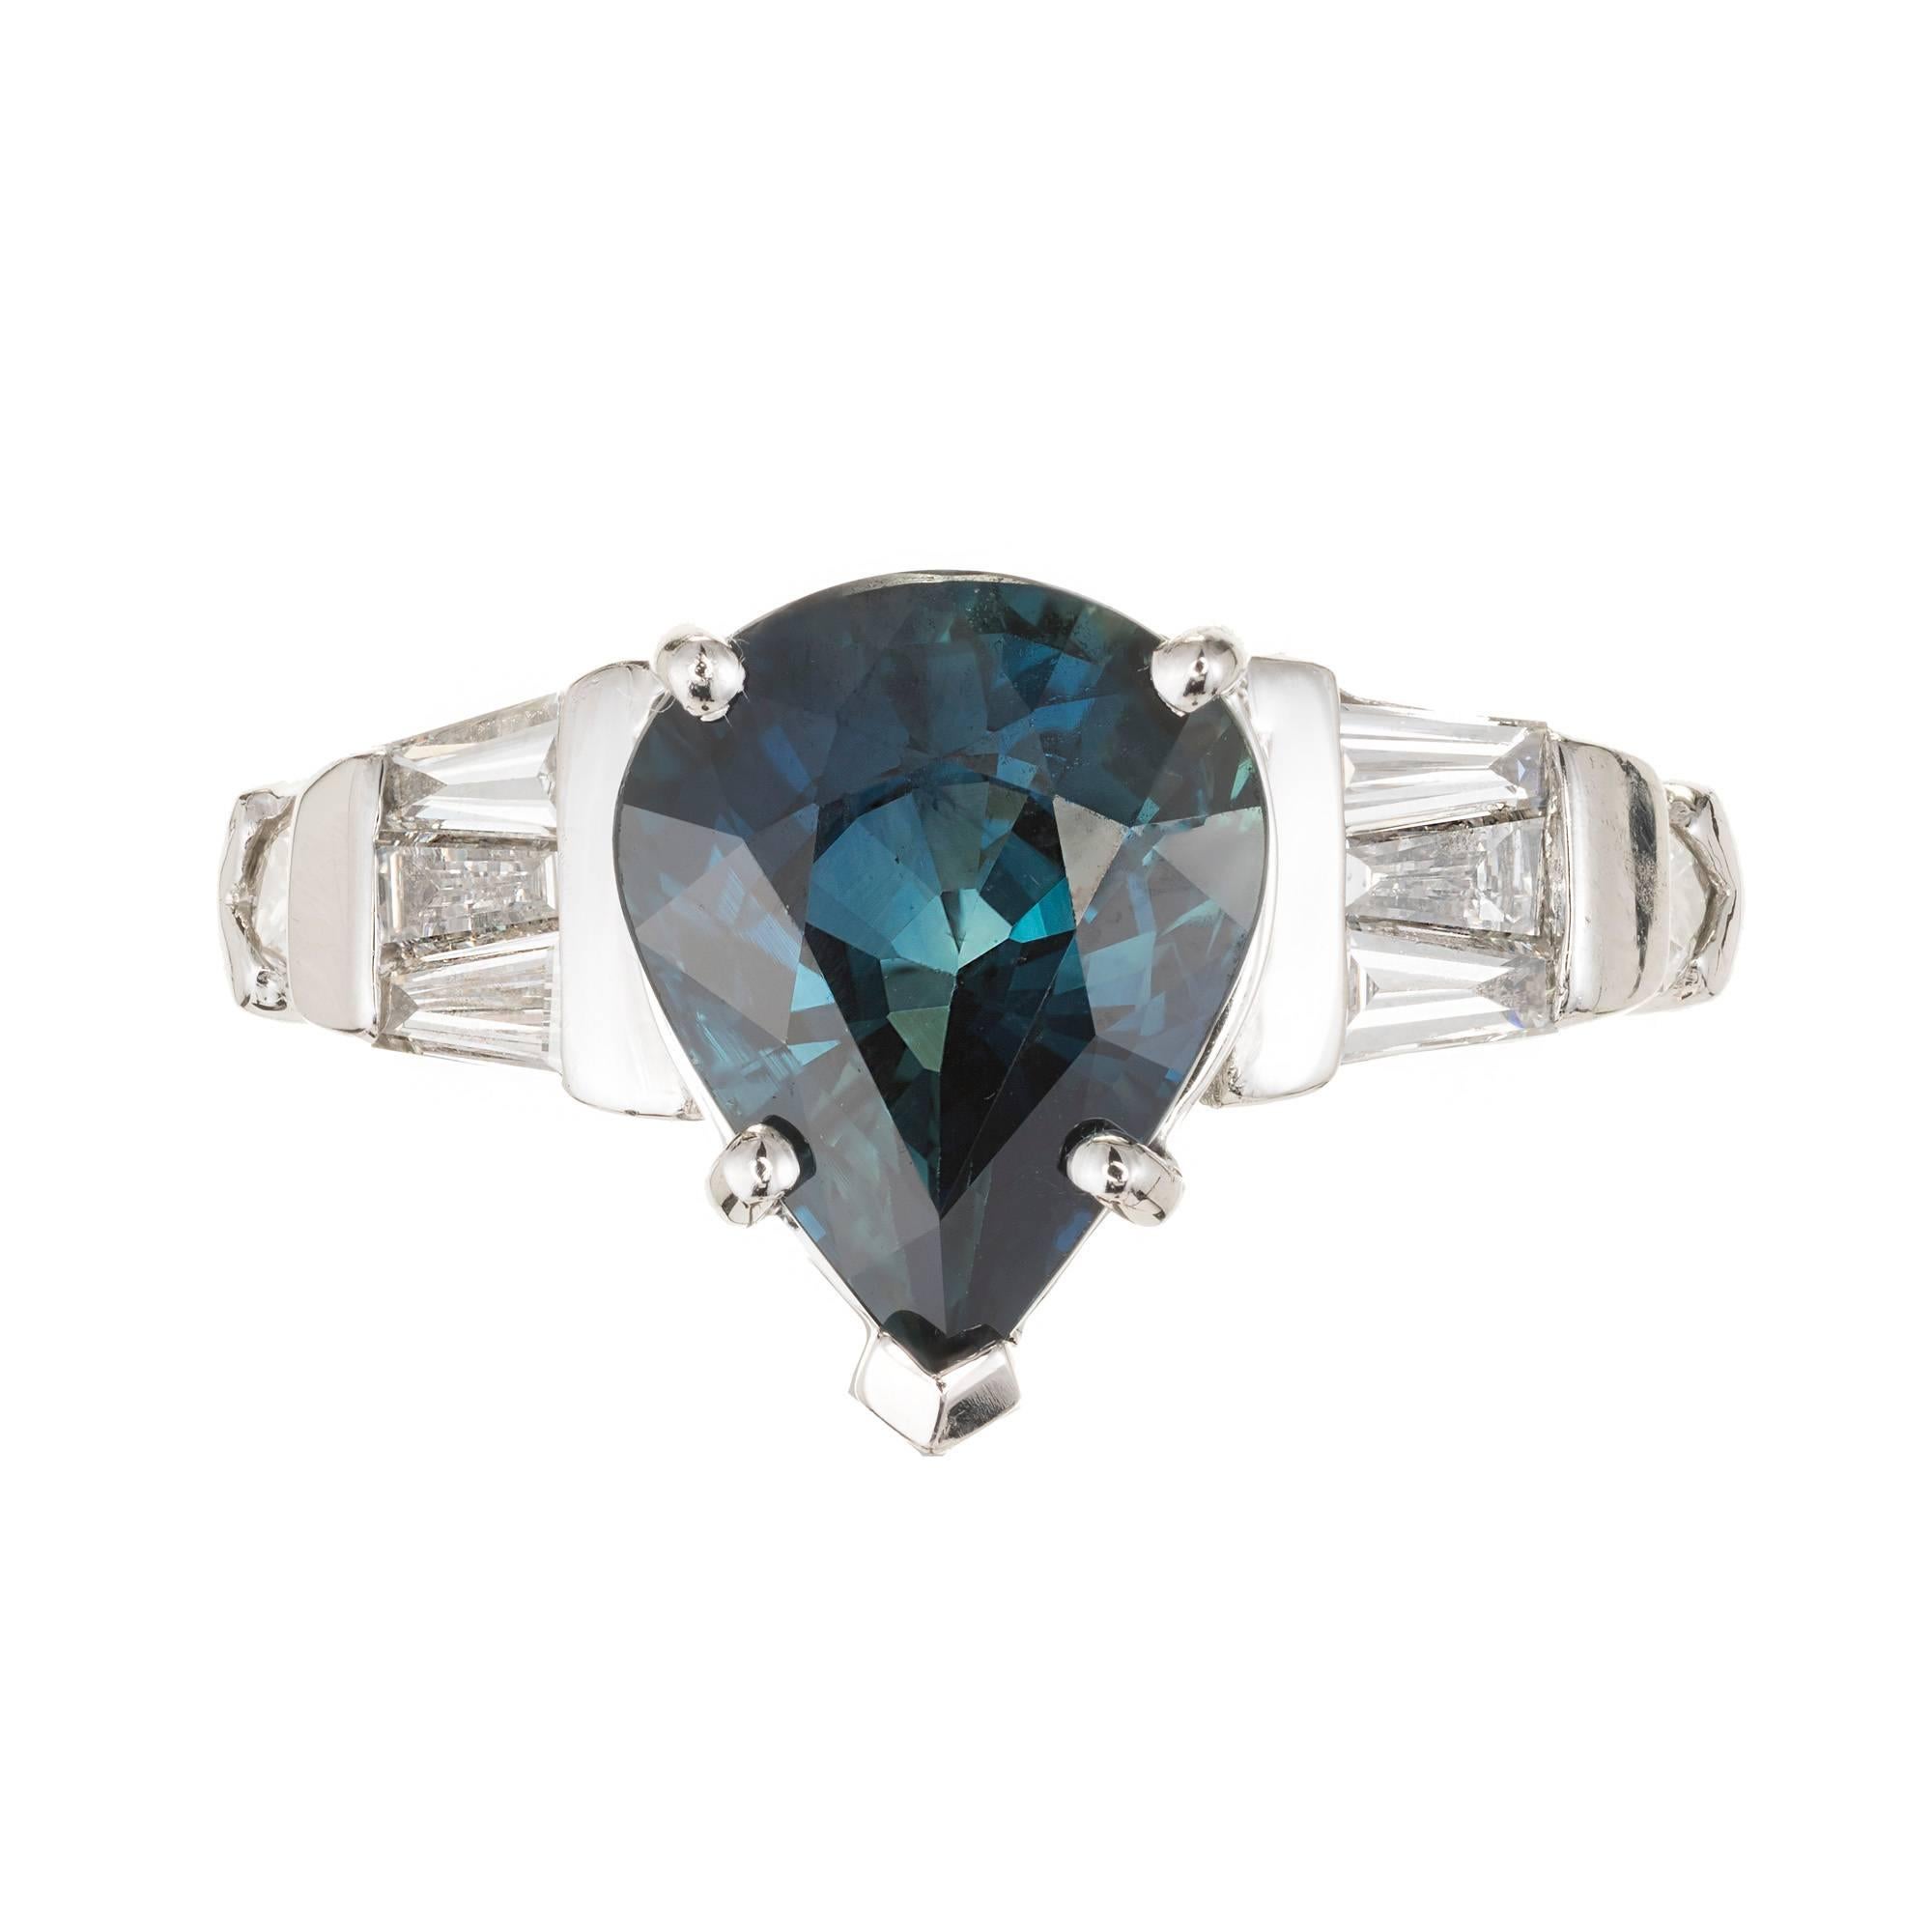 Peter Suchy 4.01ct pear shape blue Sapphire engagement ring. Pear shaped center stone with  pear diamond and baguette cut accent diamonds. GIA certified natural no heat and no enhancements.

1 pear blue Sapphire, approx. total weight 4.01cts, no